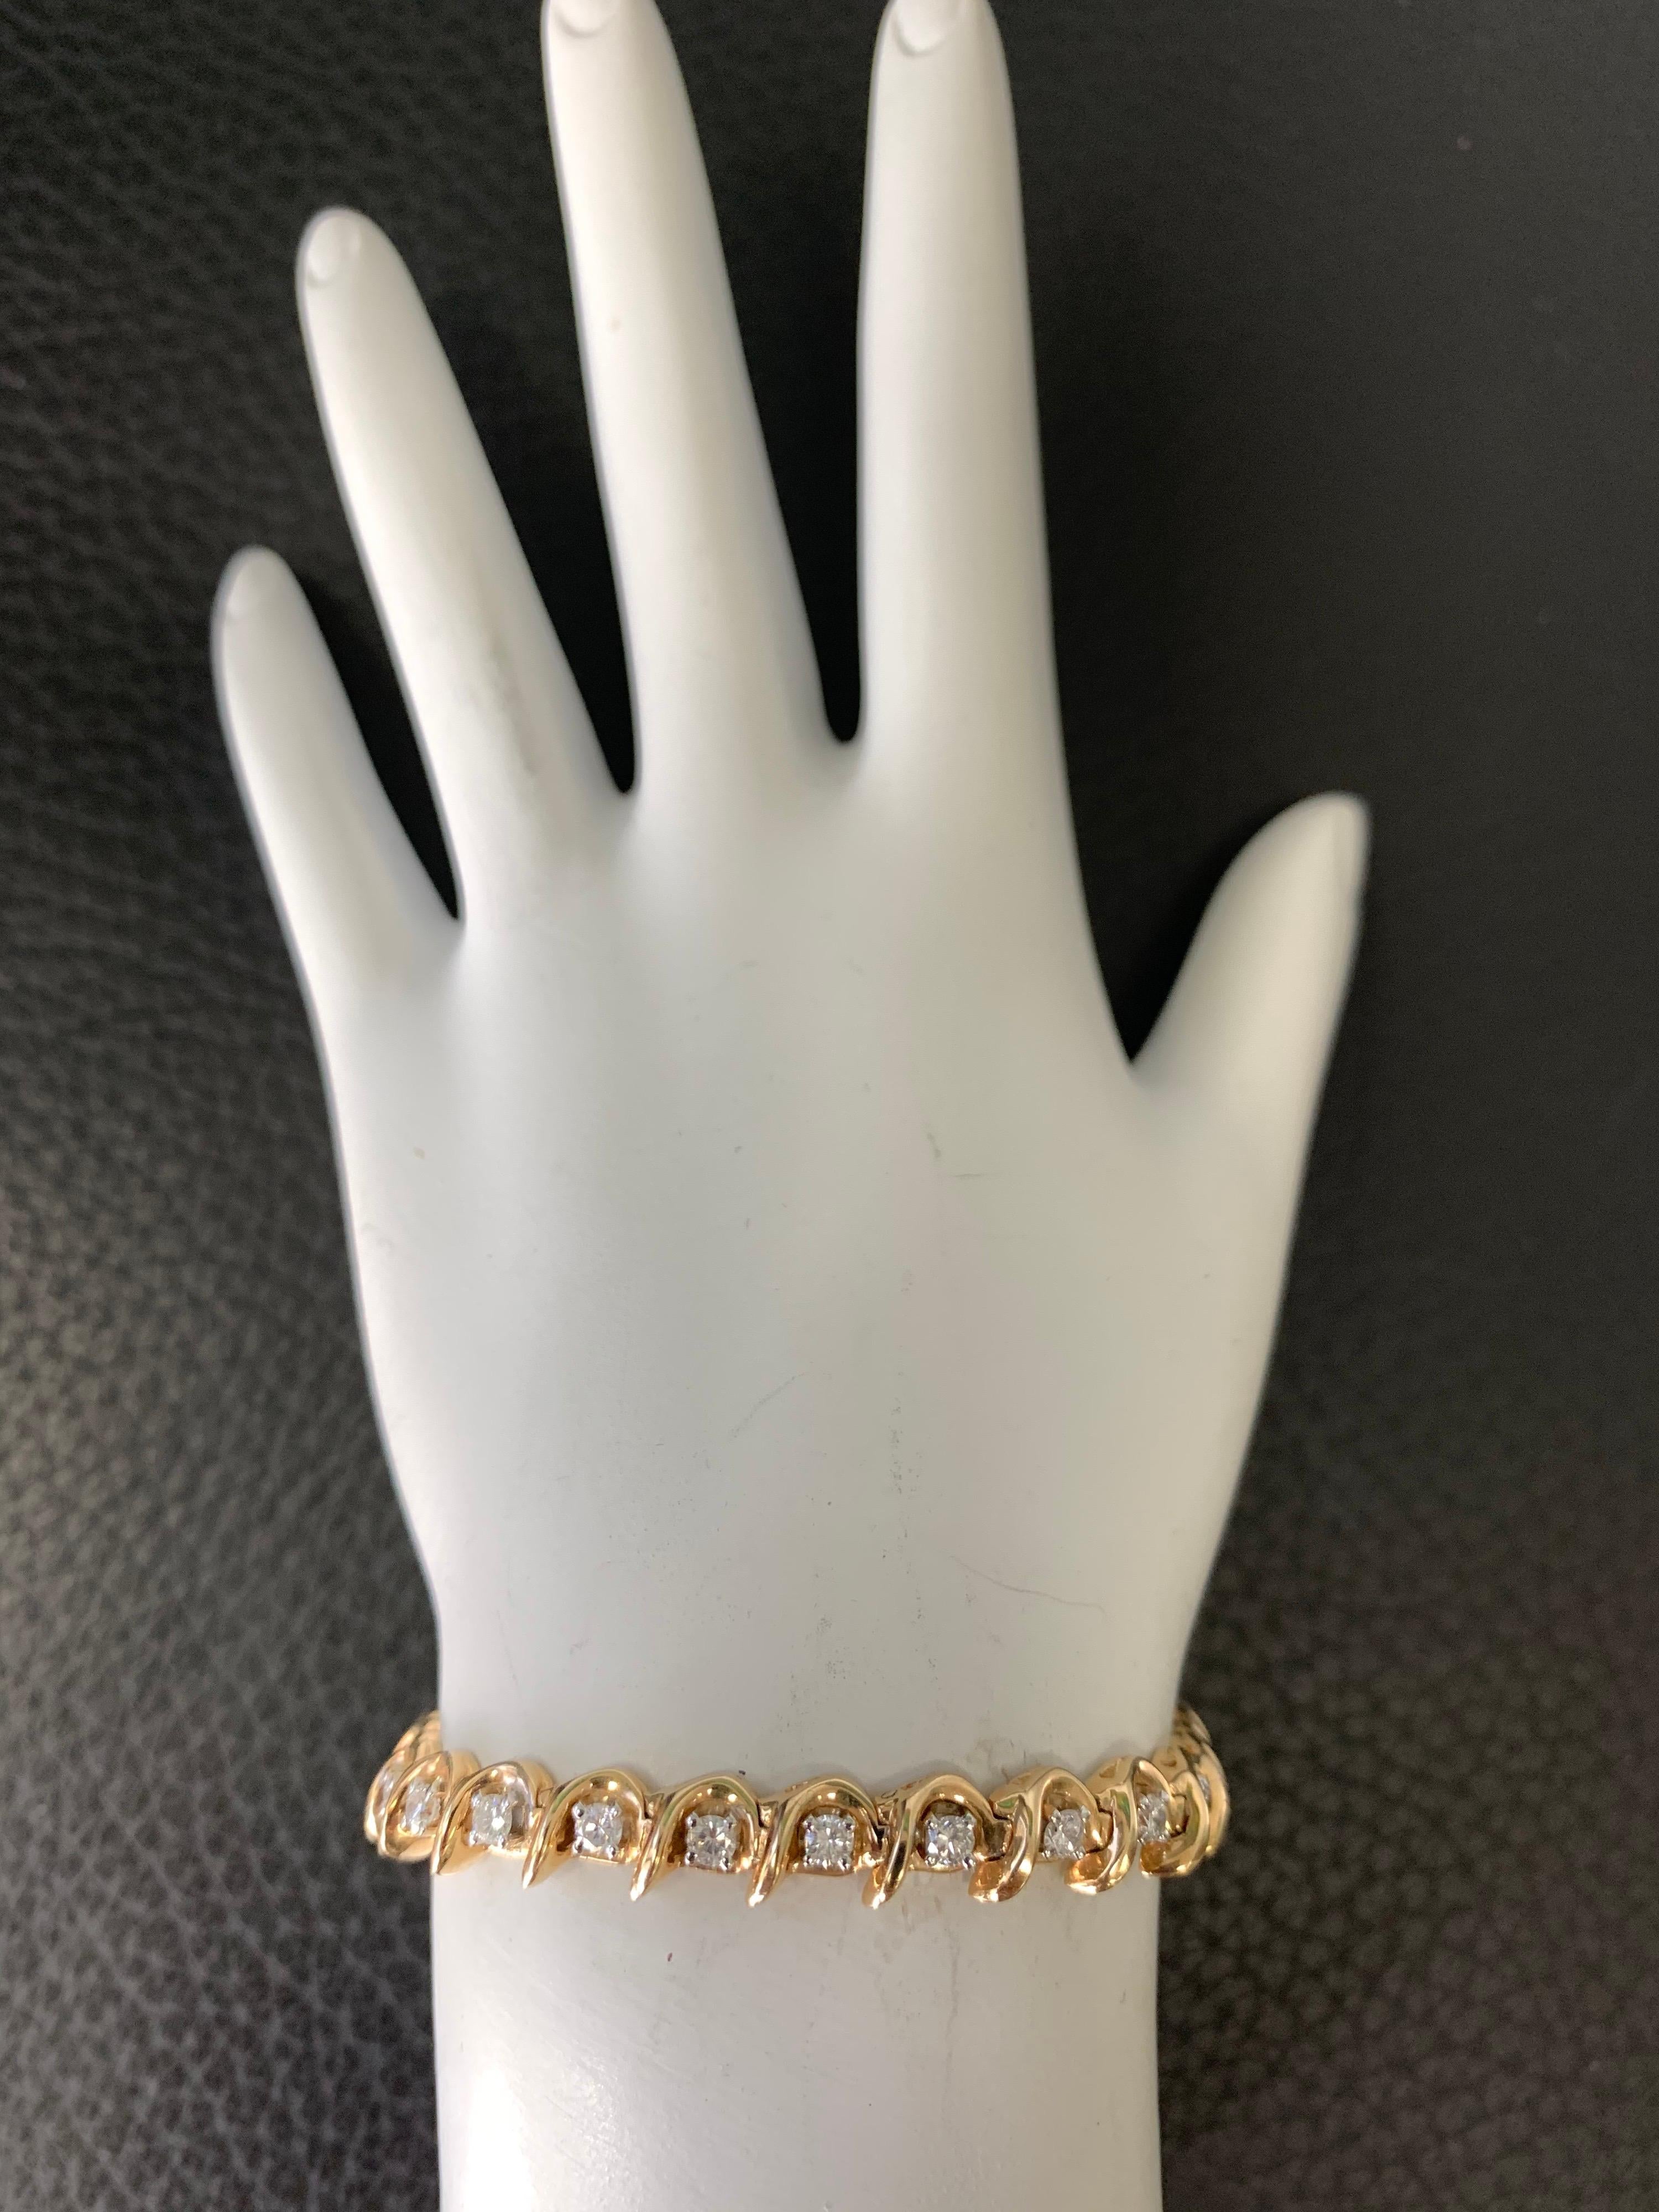 Stunning 1.75 Carat 14K Yellow Gold Natural Estate Diamond Bracelet set with 27 Natural Round Brilliant Diamonds approx G in color and VS-SI in clarity. 

The length of the piece is 7